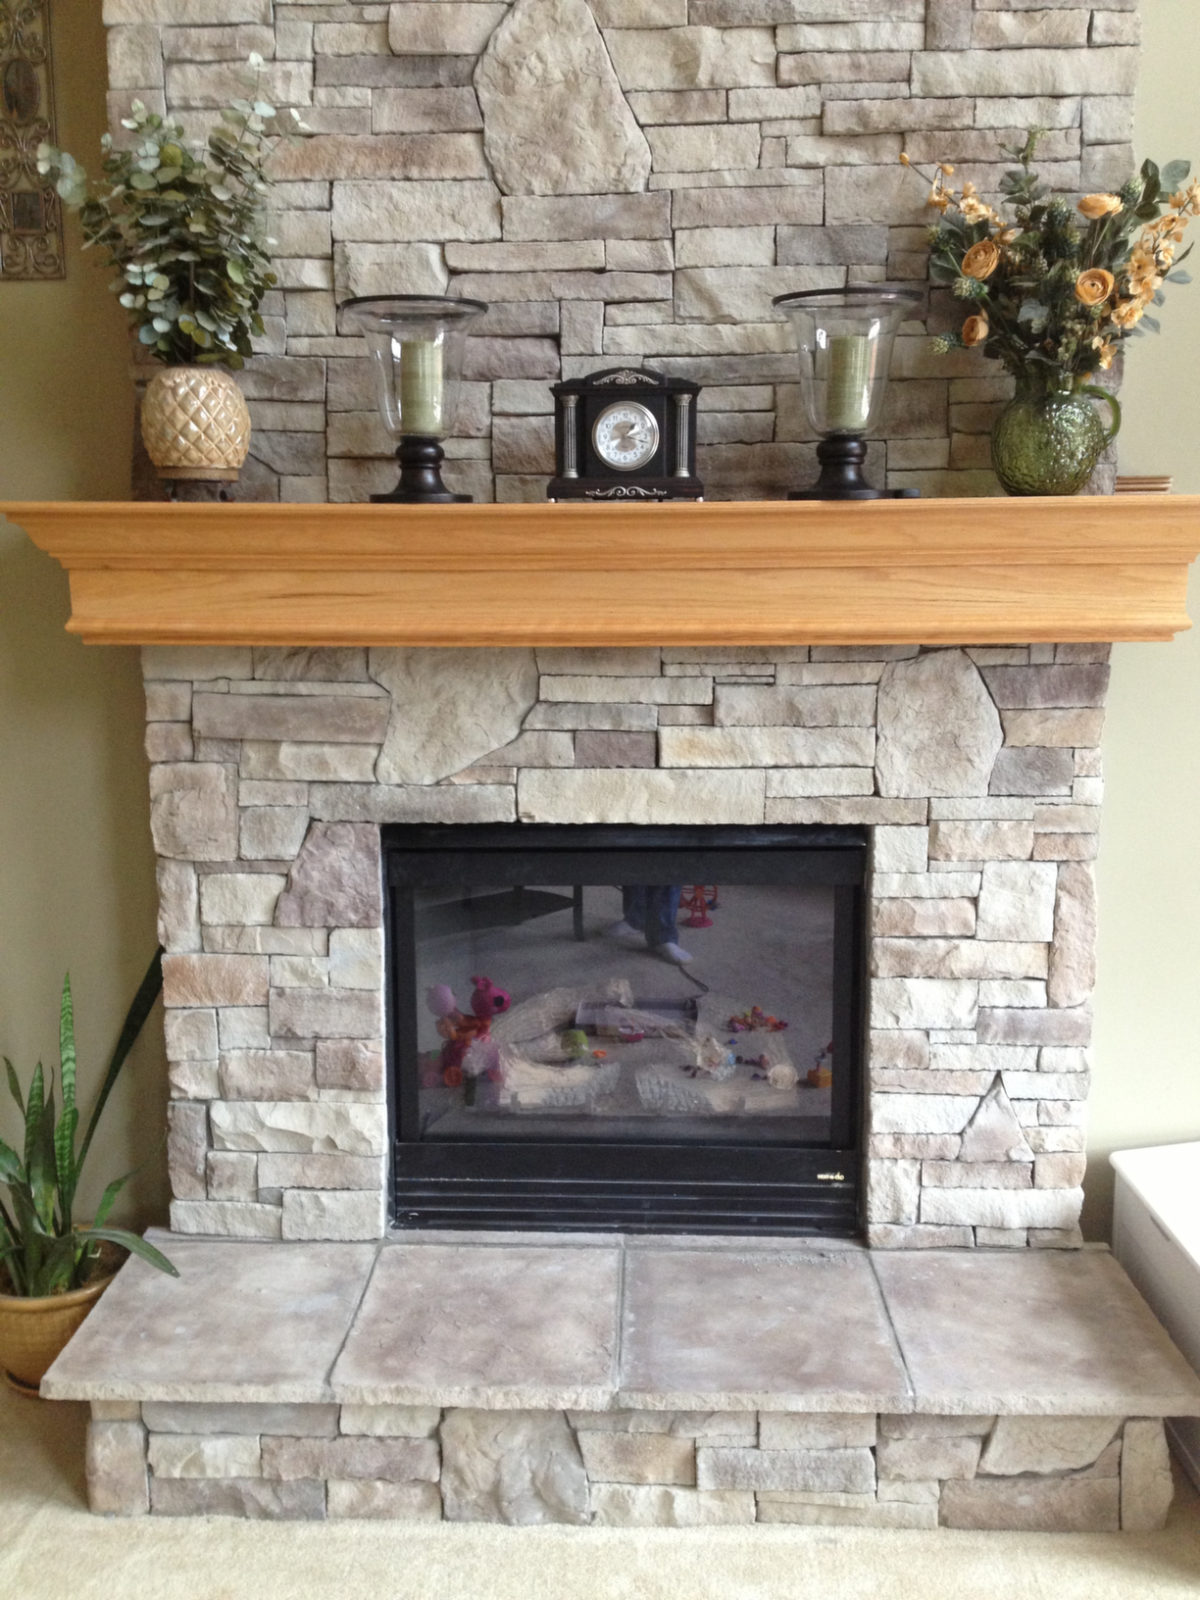 North Star Stone offers a wide range of stone for fireplaces with custom colors and styles to help you update and create a beautiful fireplace at a cost you can afford.